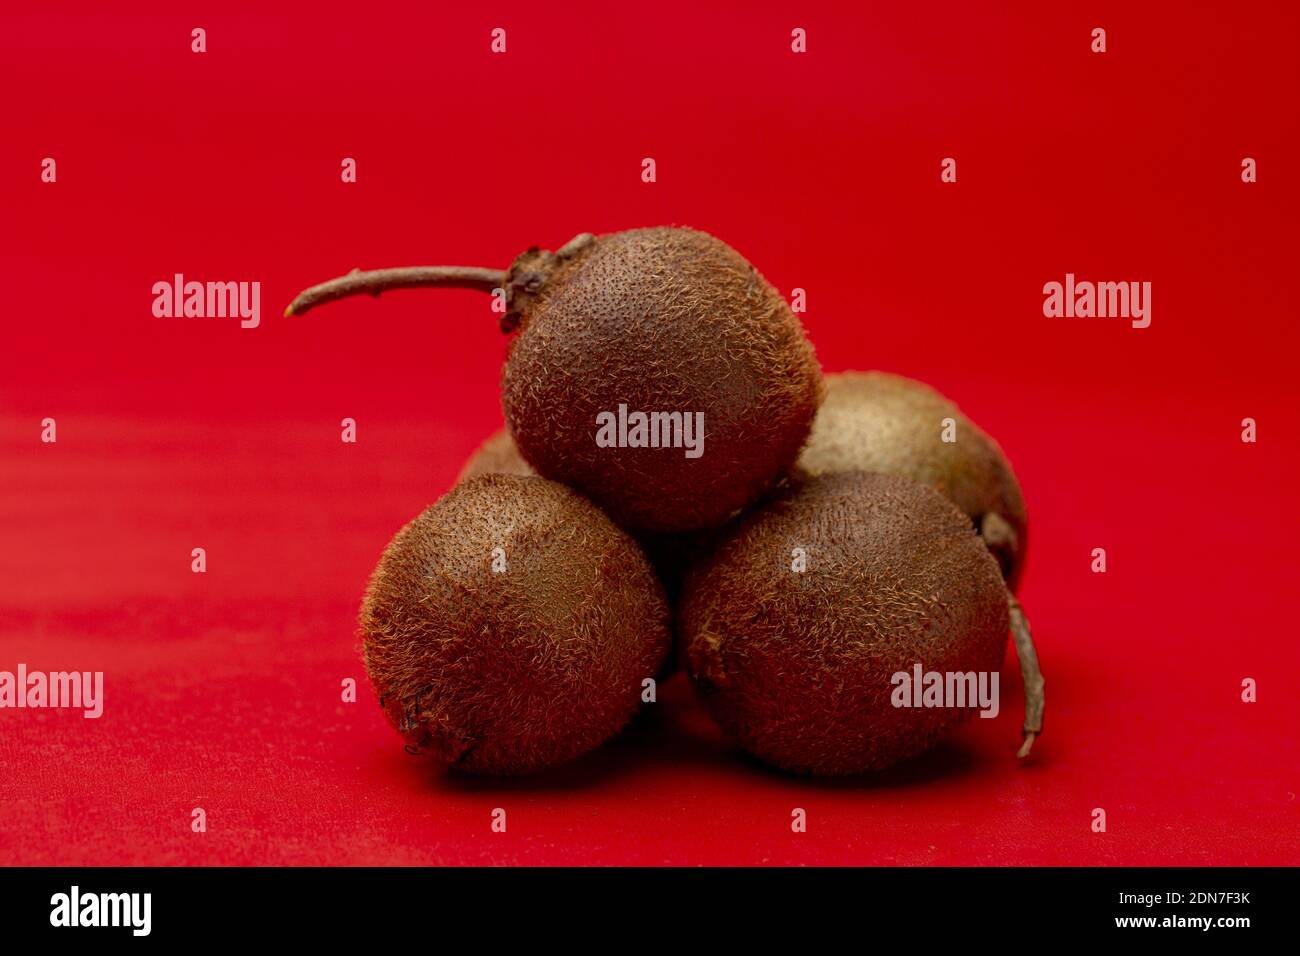 Primary red surface and background with several tiny kiwifruit or Actinidia Deliciosa Setosa on top of each other with a stem sticking out Stock Photo